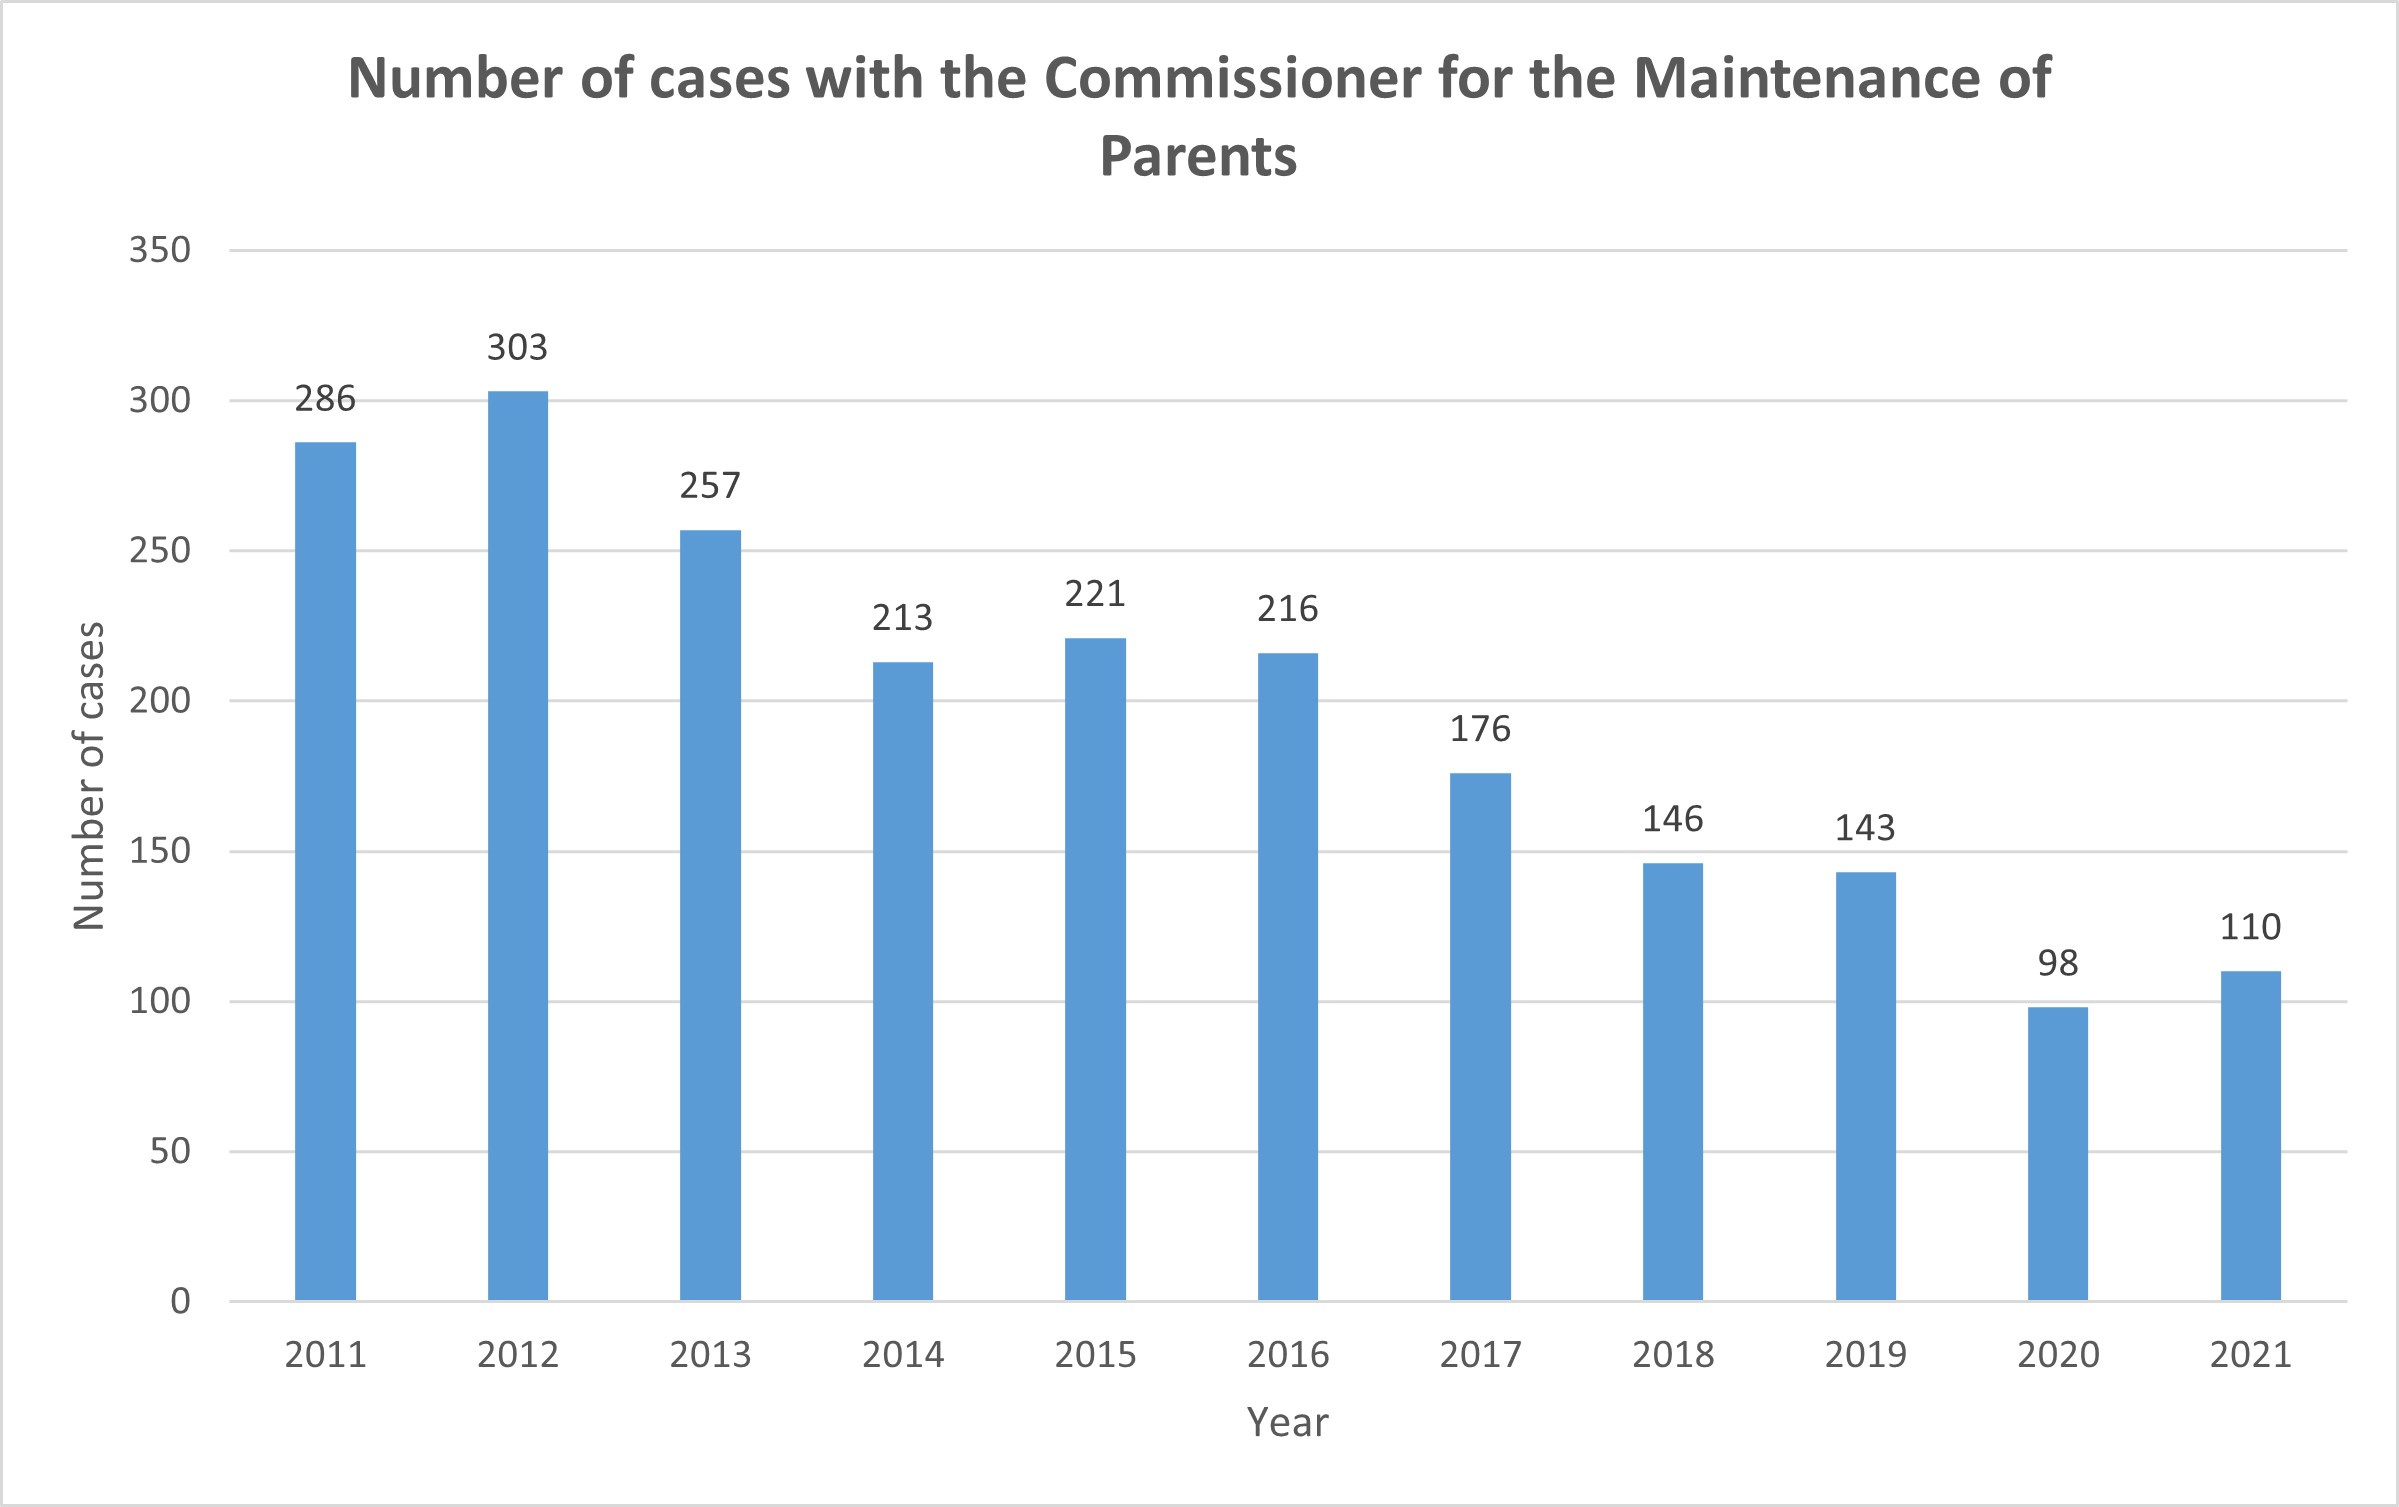 Cases with the Commissioner for Maintenance of Parents 2021